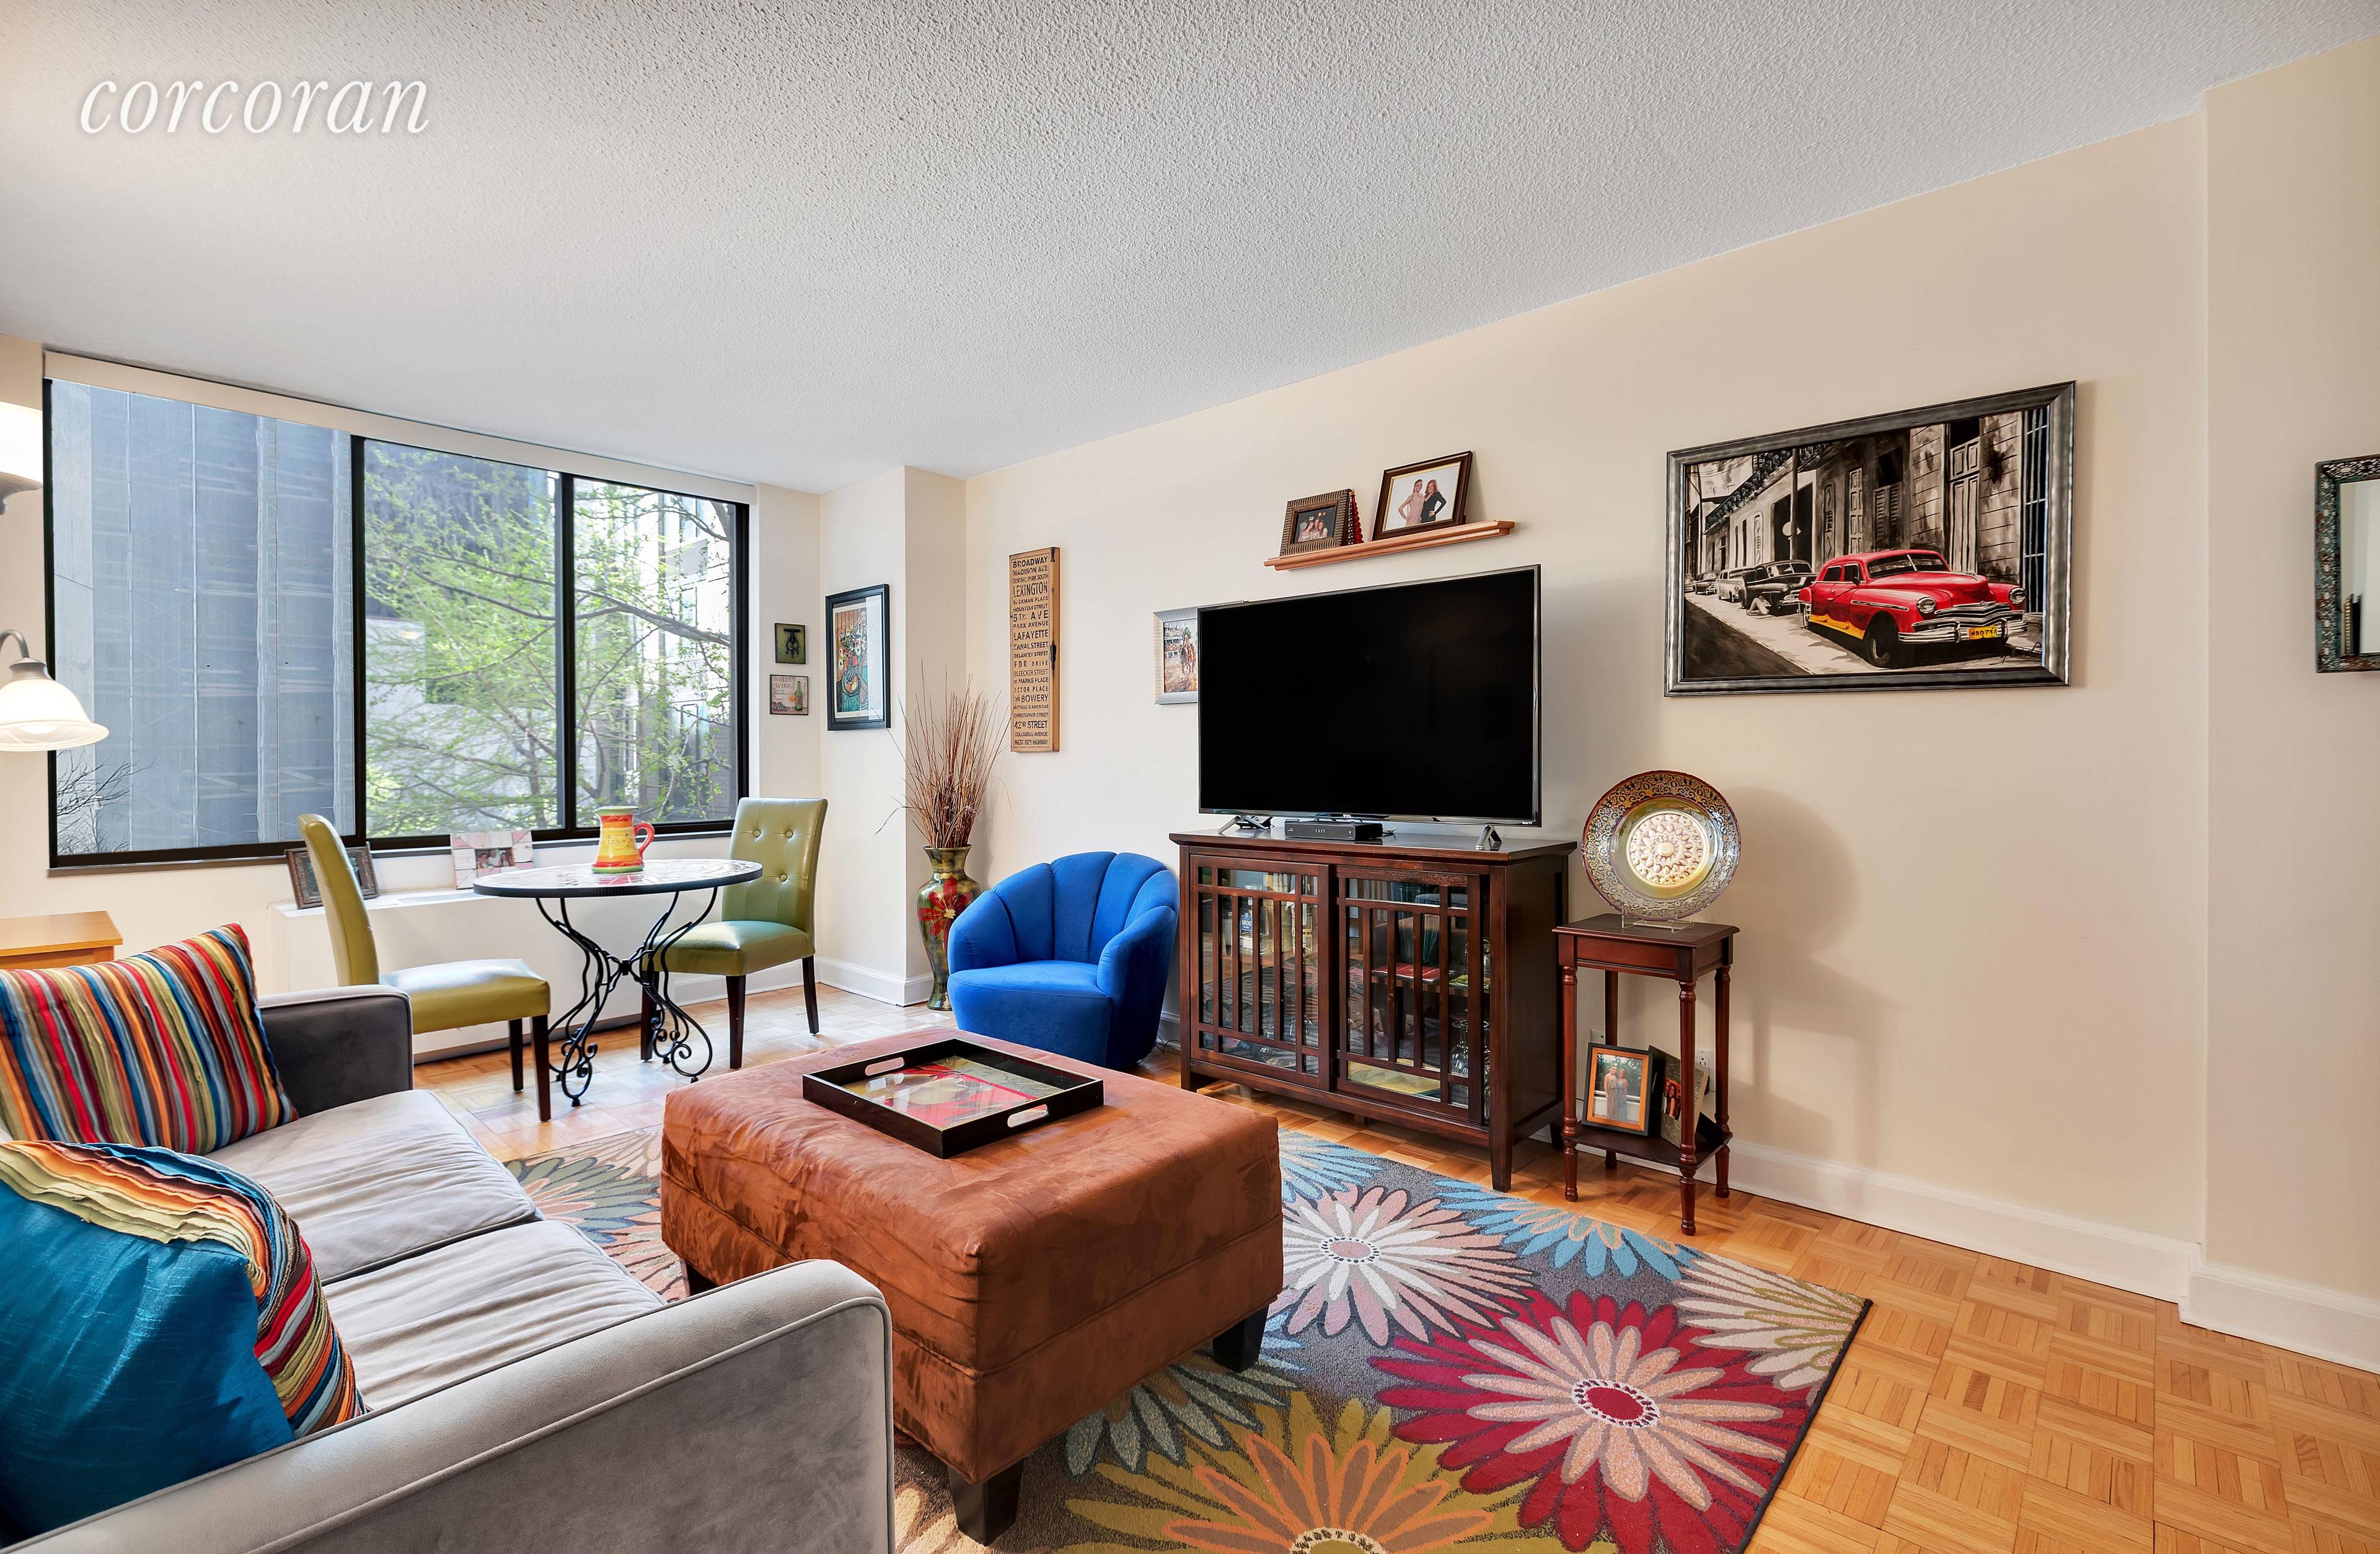 Light, bright and spacious 1 bedroom apartment setback from the street overlooking the treetop views of the building's courtyard in The Madison Green Condominium.